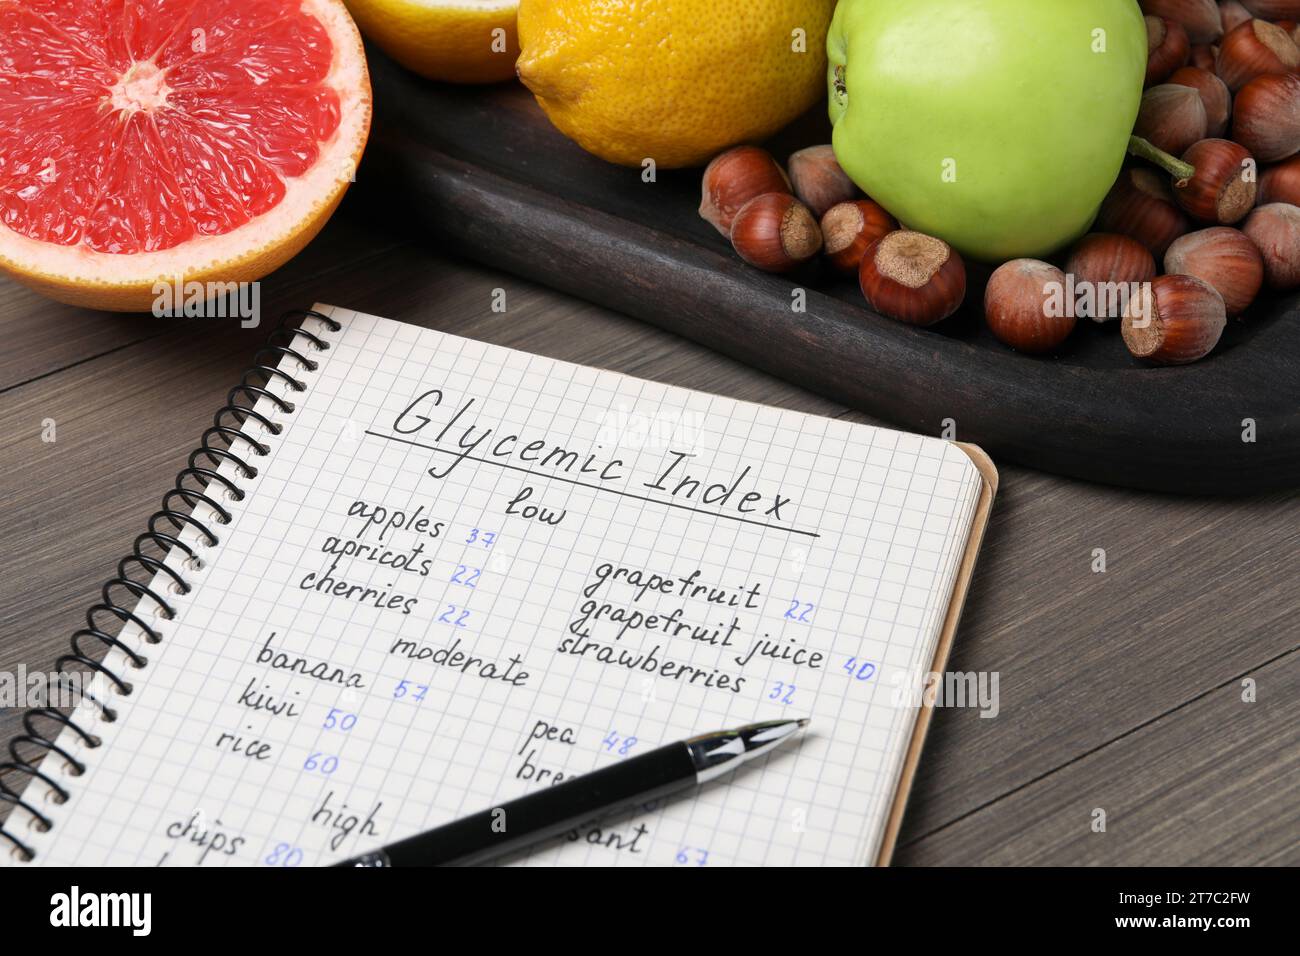 Notebook with products of low, moderate and high glycemic index, pen and food on wooden table, closeup Stock Photo